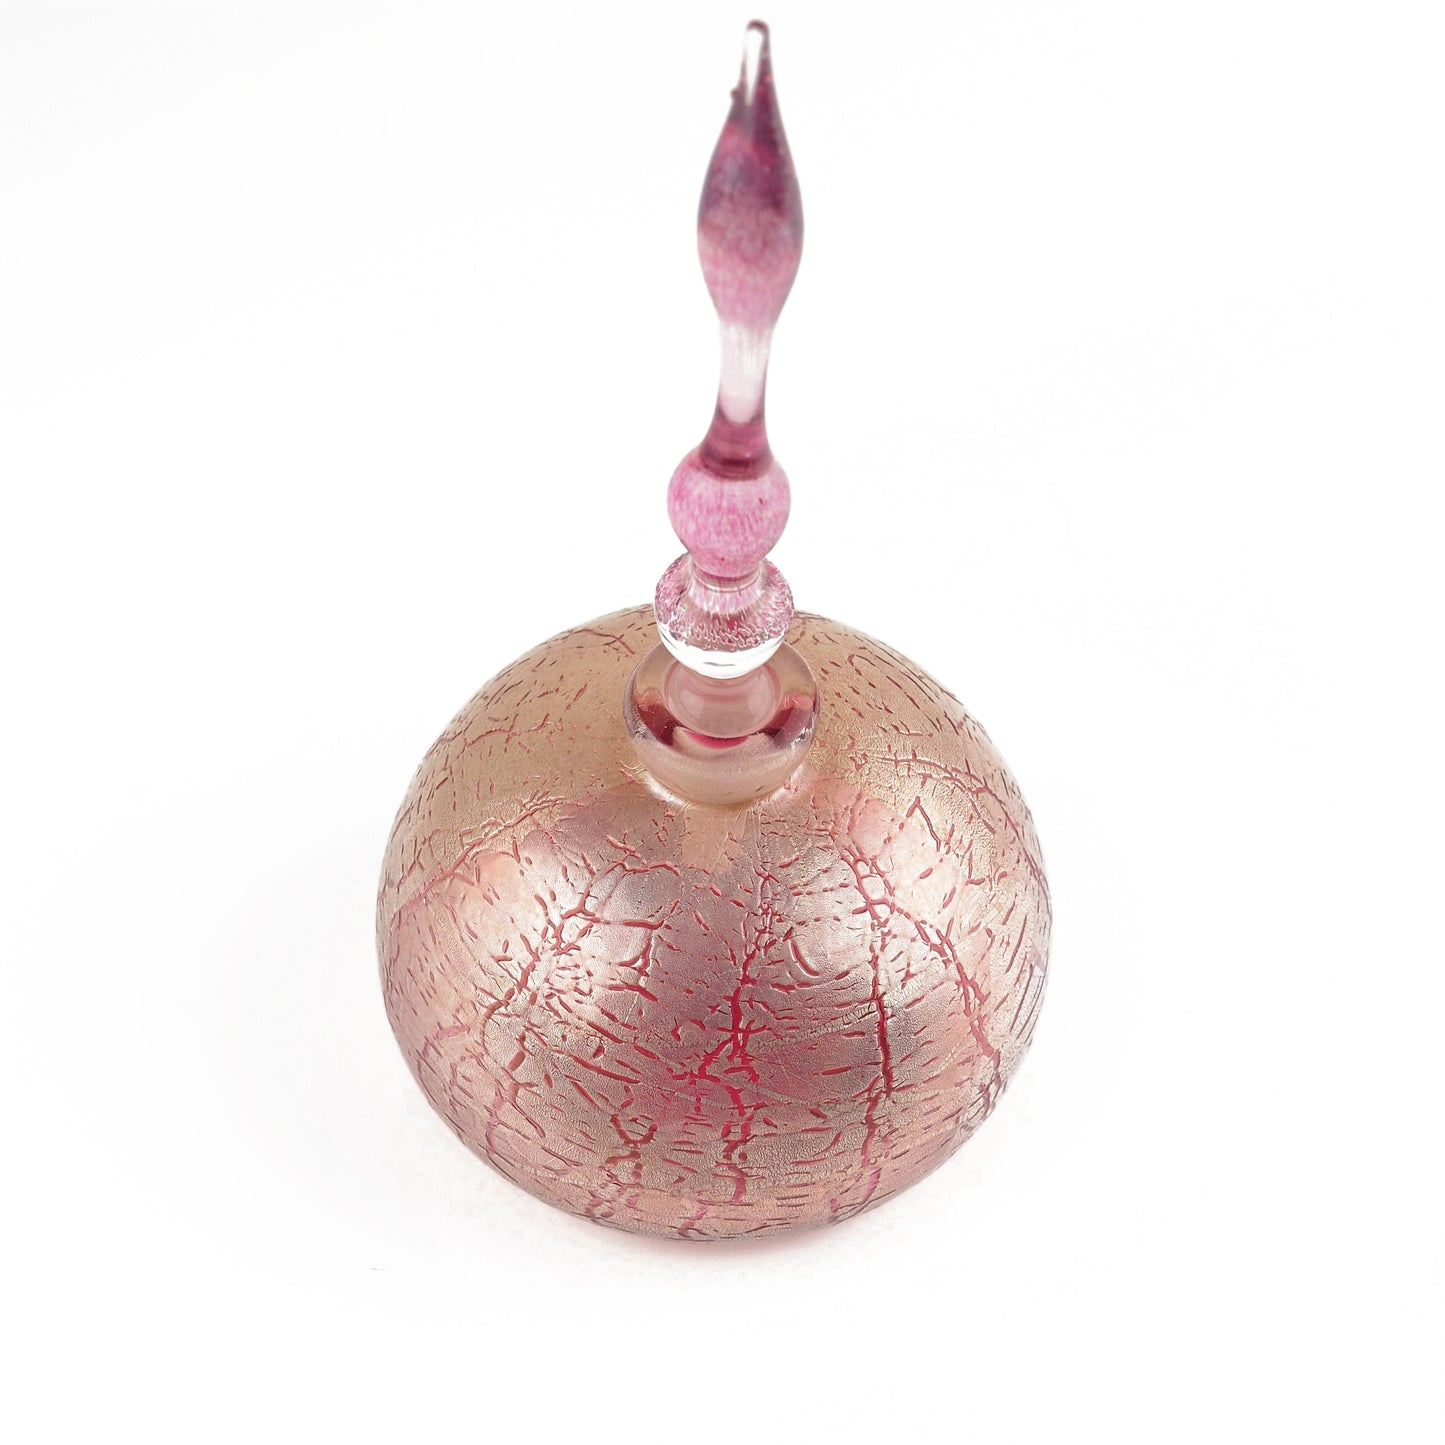 Carcass, James – Pink Stoppered Scent Bottle | James Carcass | Primavera Gallery